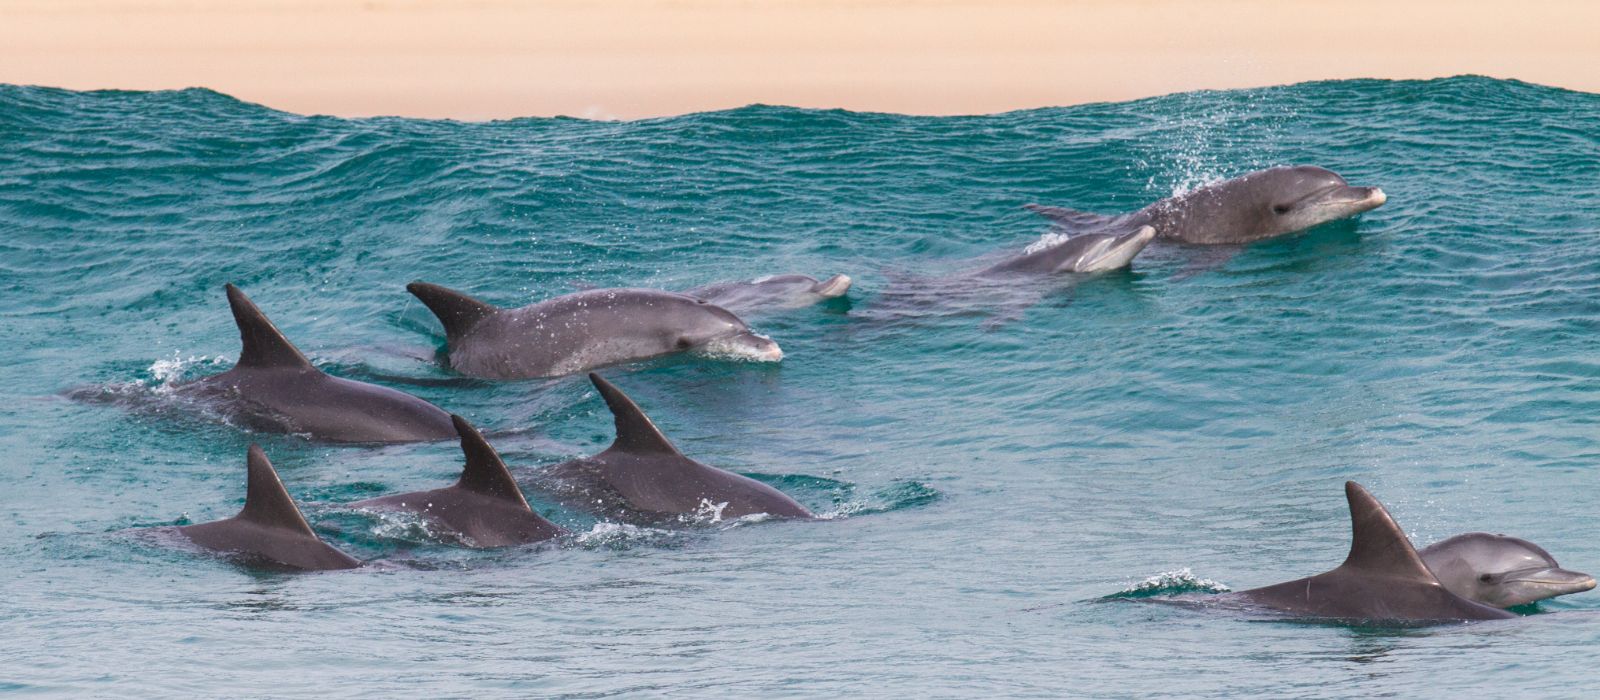 a group of dolphins' dorsal fins showing while they swim under the sea